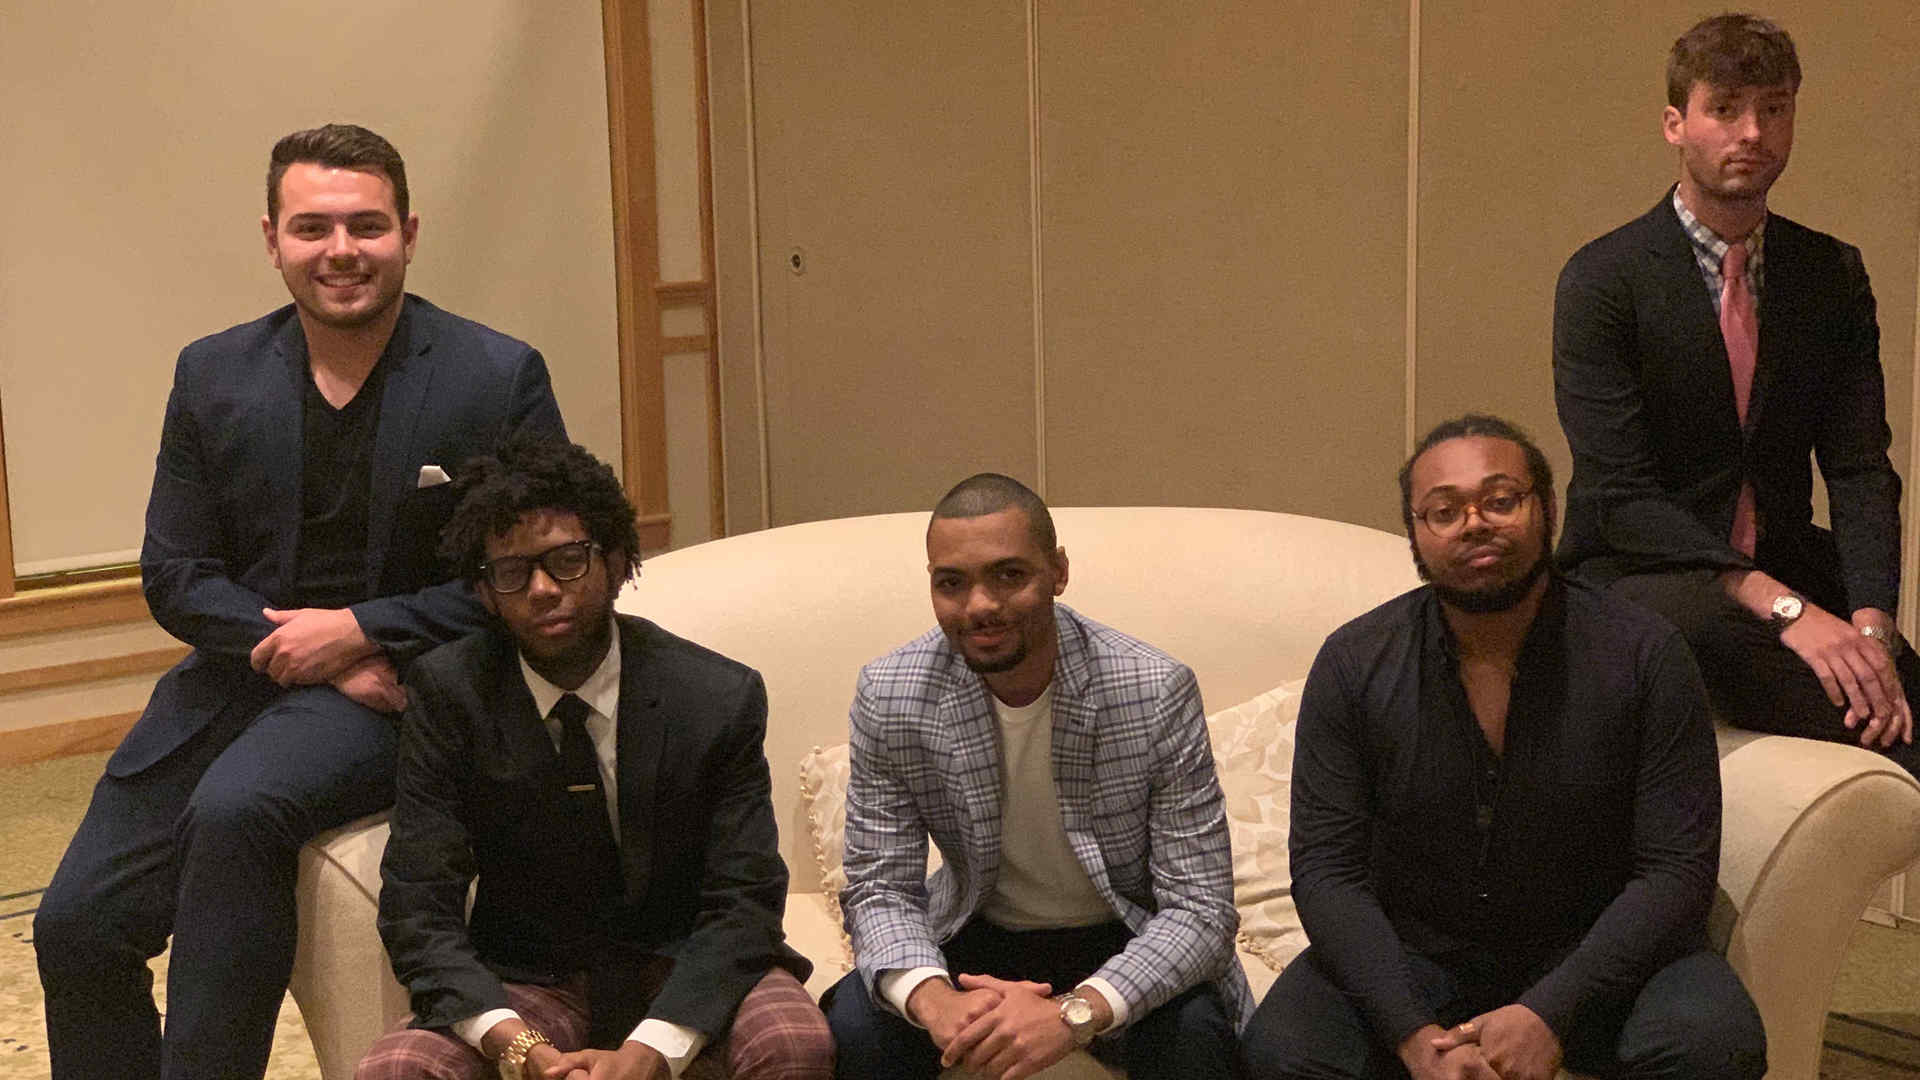 Five students representing the Dave Brubeck Ensemble, sitting on a couch, who participated in the Cape Cod Jazz Festival over the summer. From left to right, bassist Philip Norris, pianist Sean Mason, trumpeter Anthony Hervey, alto saxist Immanuel Wilkins, and drummer Dag Markhus (MM ’14, jazz studies)